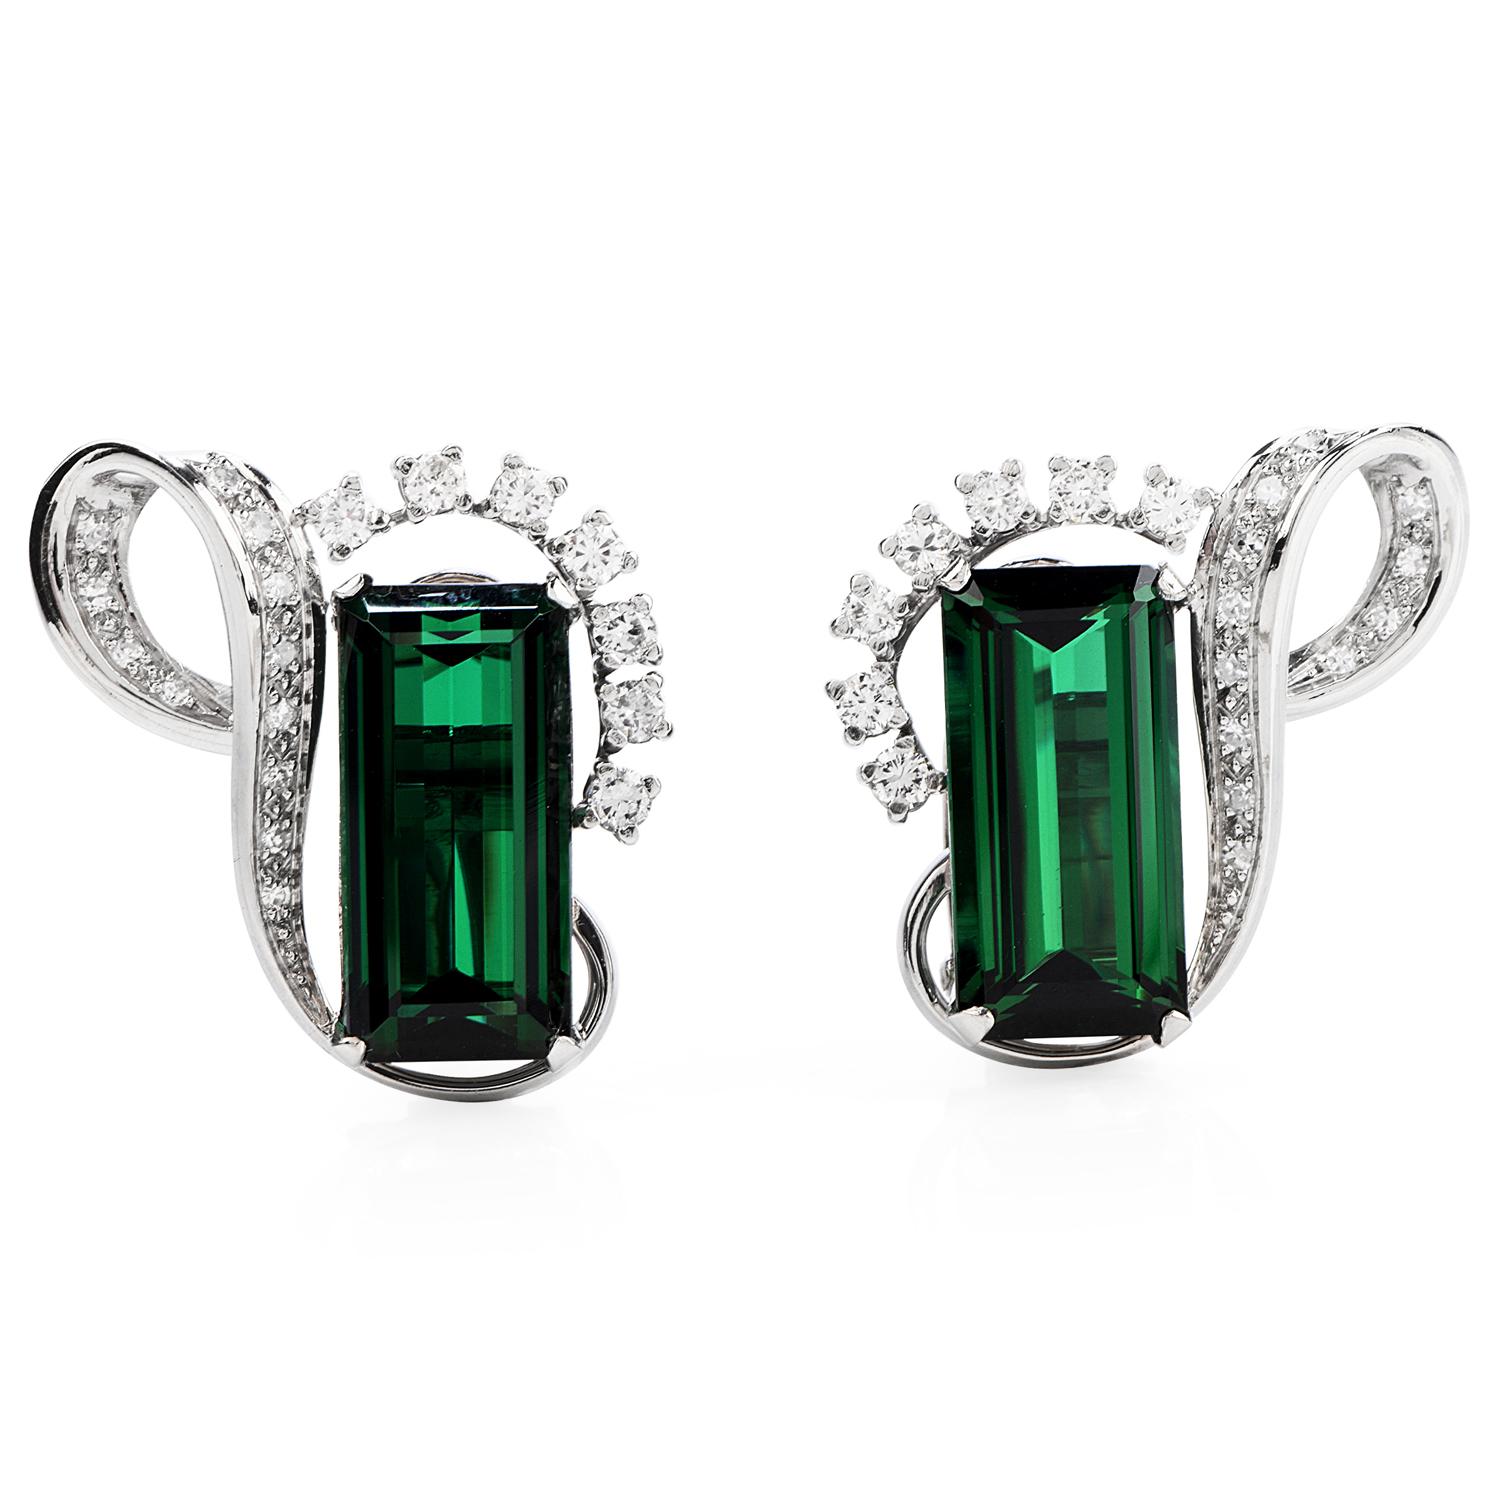 These Vintage 1960's clip-on earrings, with the deep green color of high-quality tourmaline.

Crafted in solid Platinum, for color display there are (2) Octagonal step cut, GIA certified green Tourmaline, prong-set, weighing a total of approximately